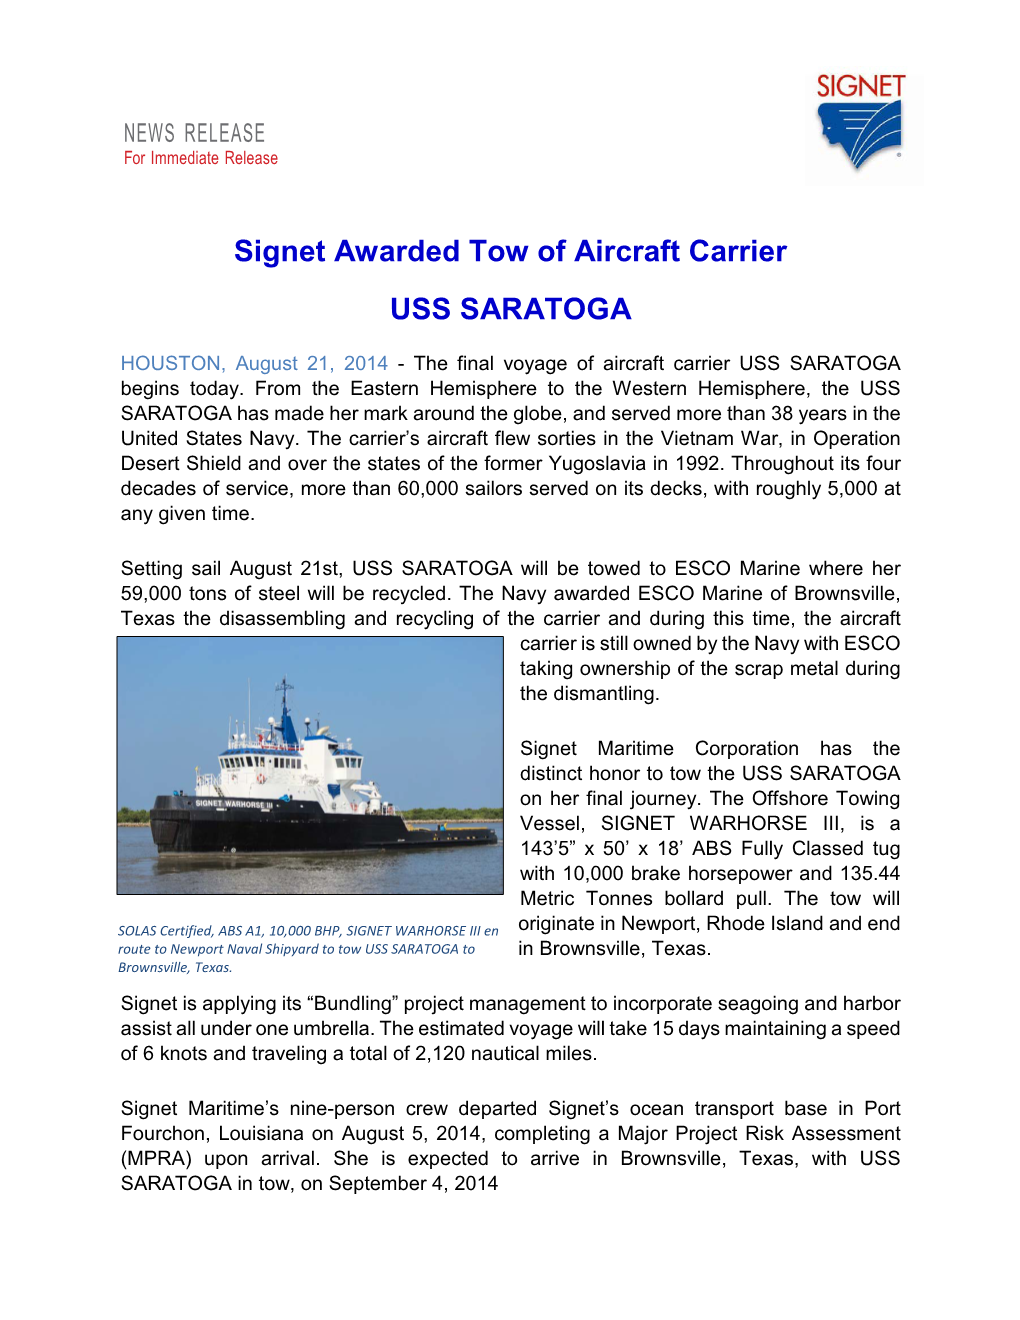 Signet Awarded Tow of Aircraft Carrier USS SARATOGA